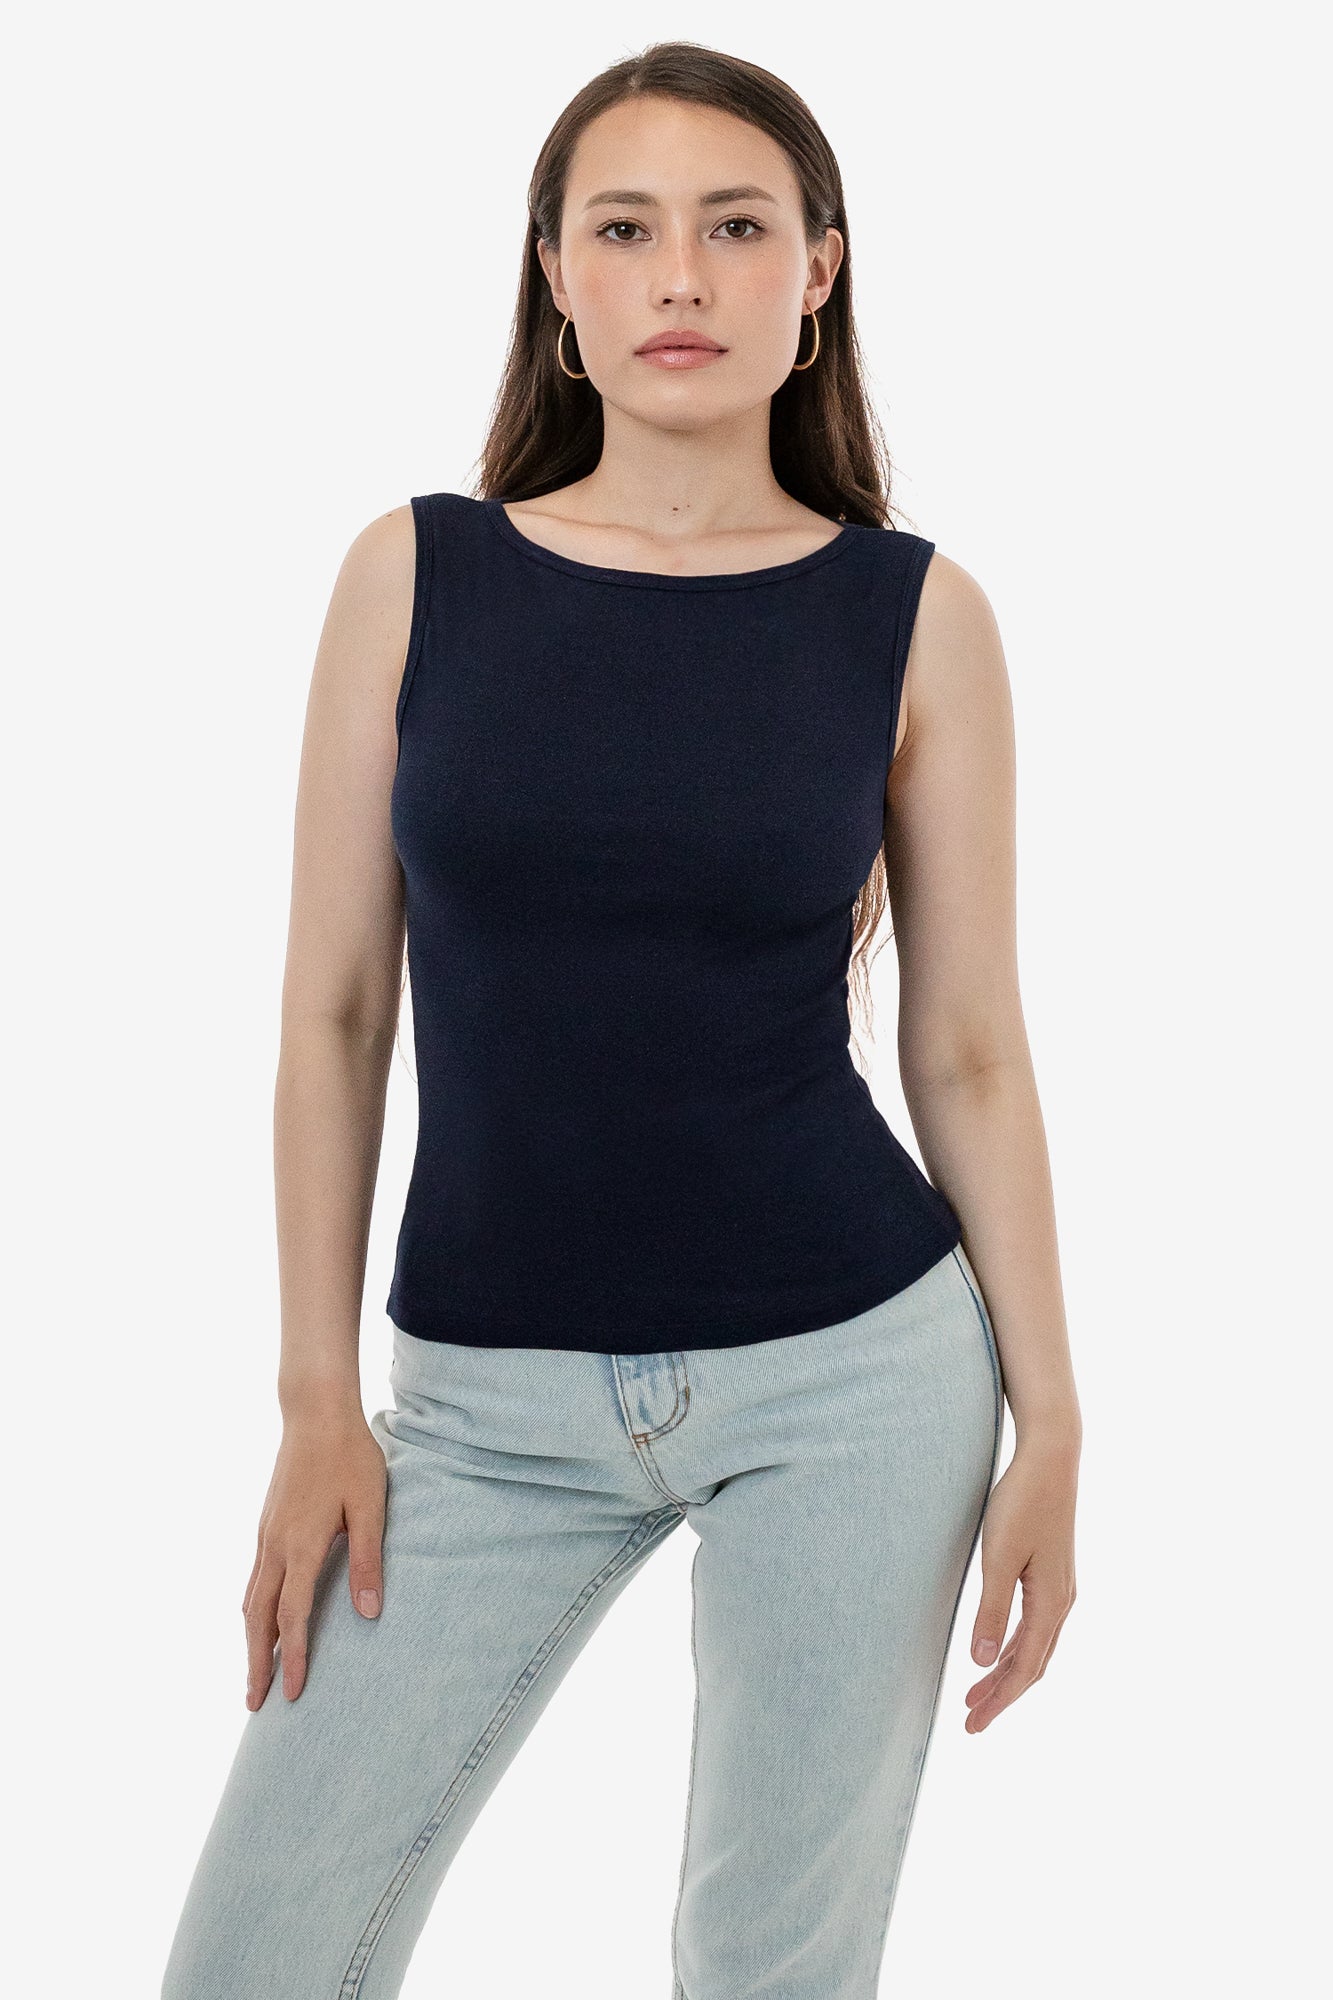 Tank Top / Sleevless Blouse / Boat Neck Top / Wide Straps Top /  Causal&formal Top / Stylish Tank Top / IVANEL / 28 Colors, S, M, L, XL, XXL  